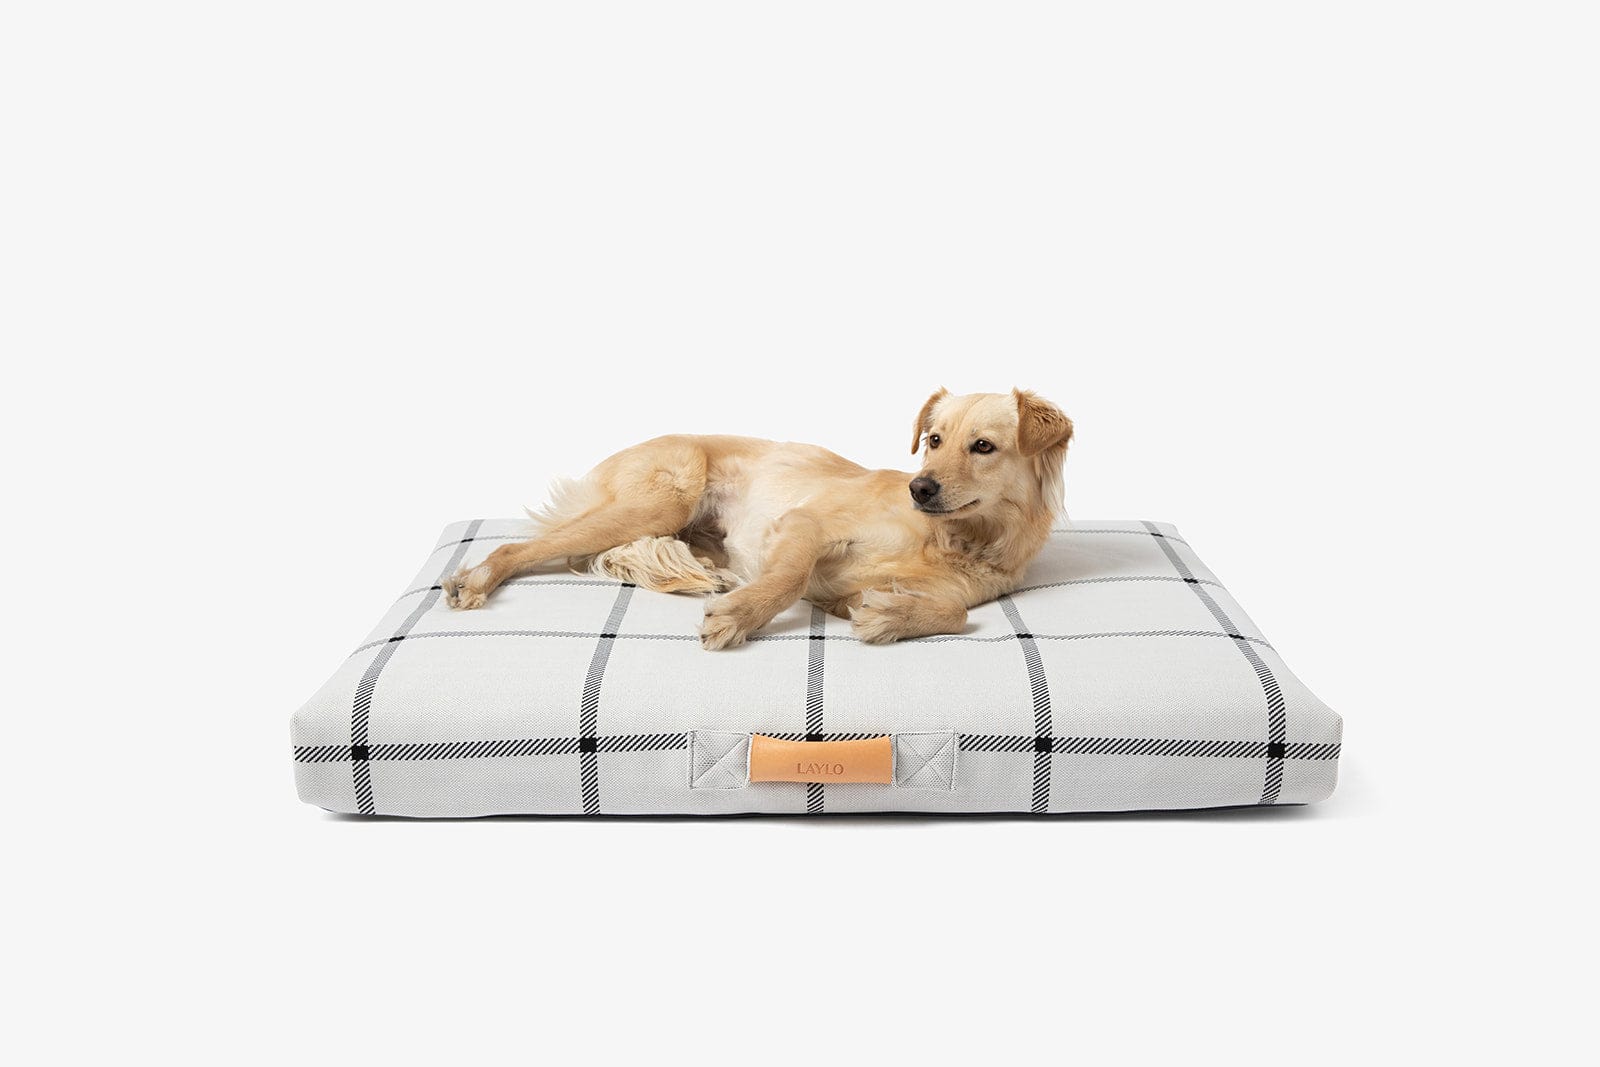 Laylo Pets LAY LO Pets - White Plaid Dog Bed or Bed Cover Lay Lo Pets